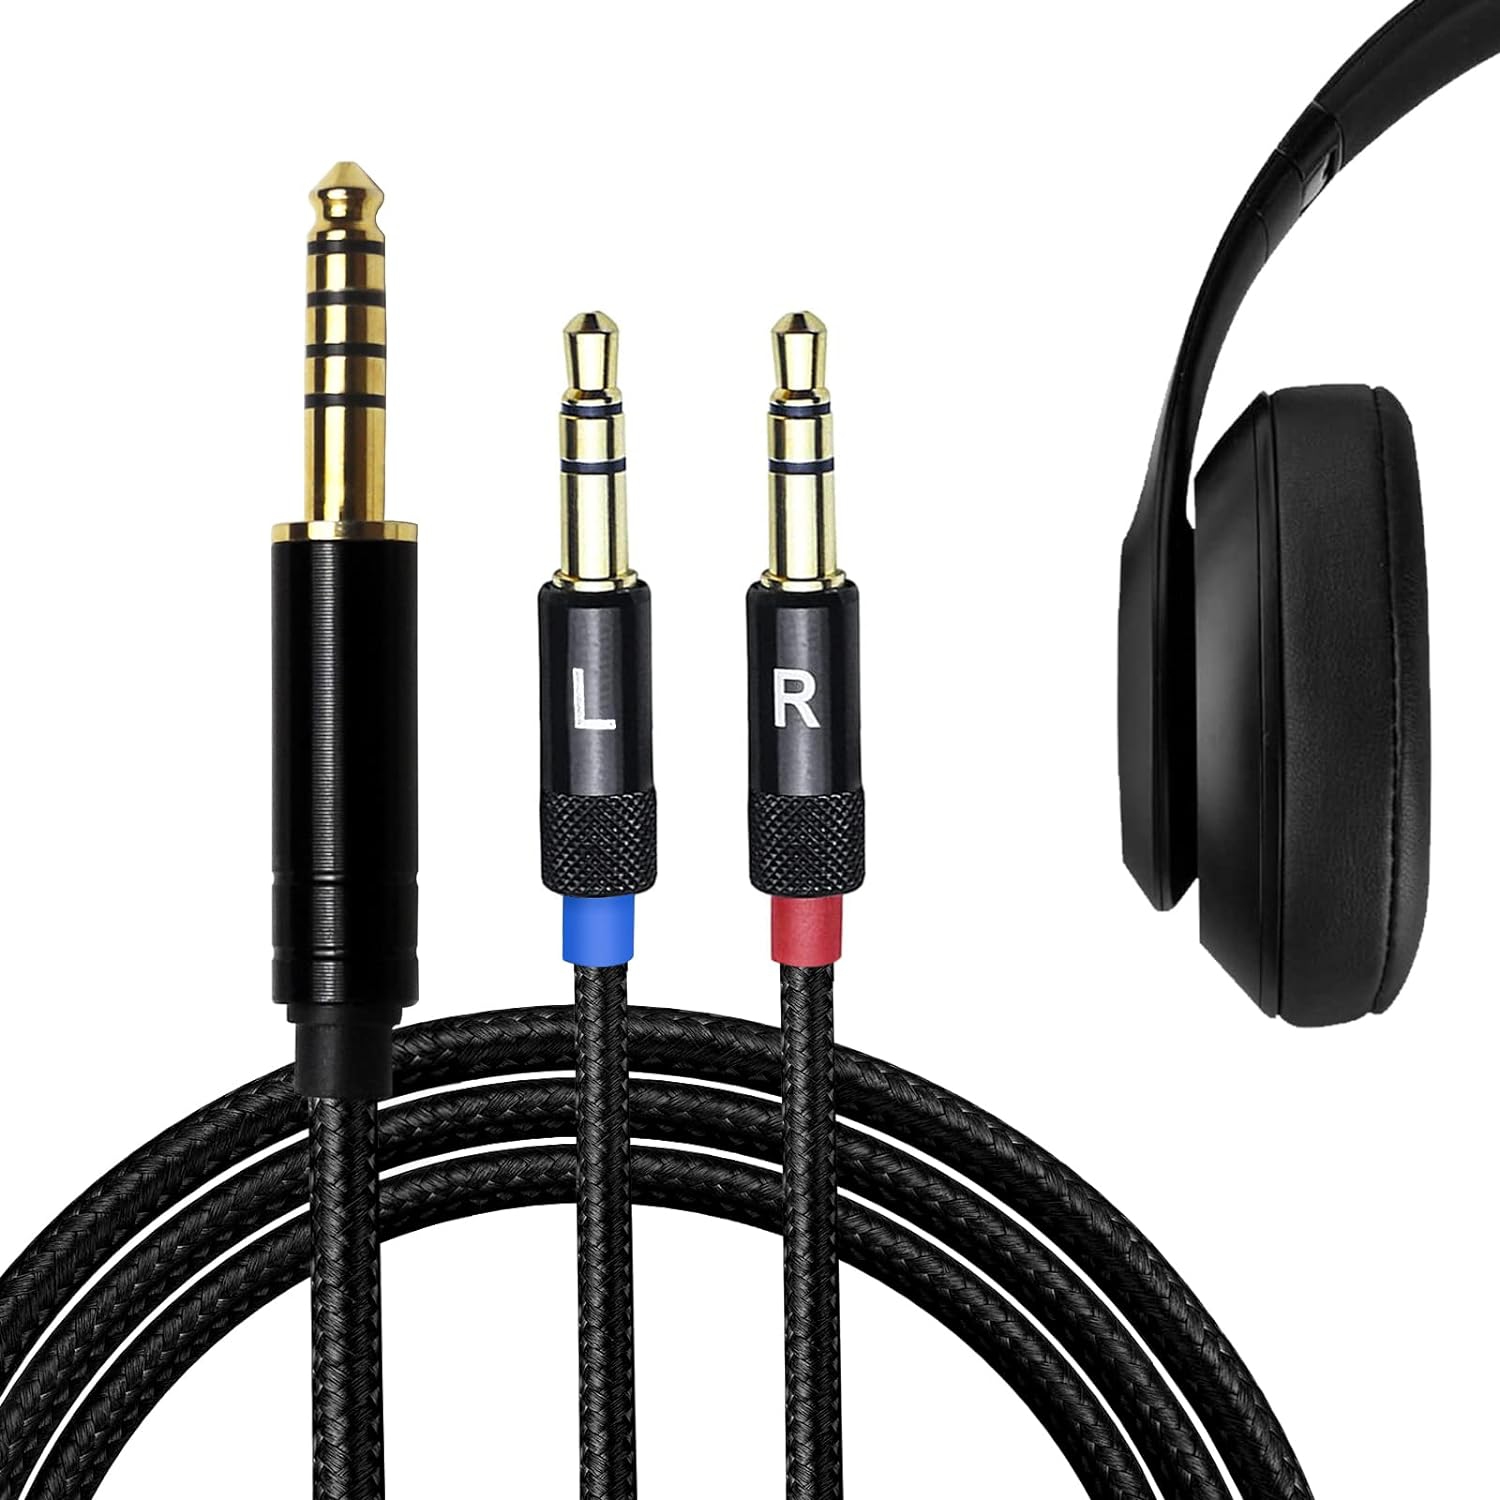 4.4mm Upgrade Replacement Cable for Hifiman Sundara/ANANDA-BTHE4XX/HE-400i/560/OneOdio Pro-10 Headphone